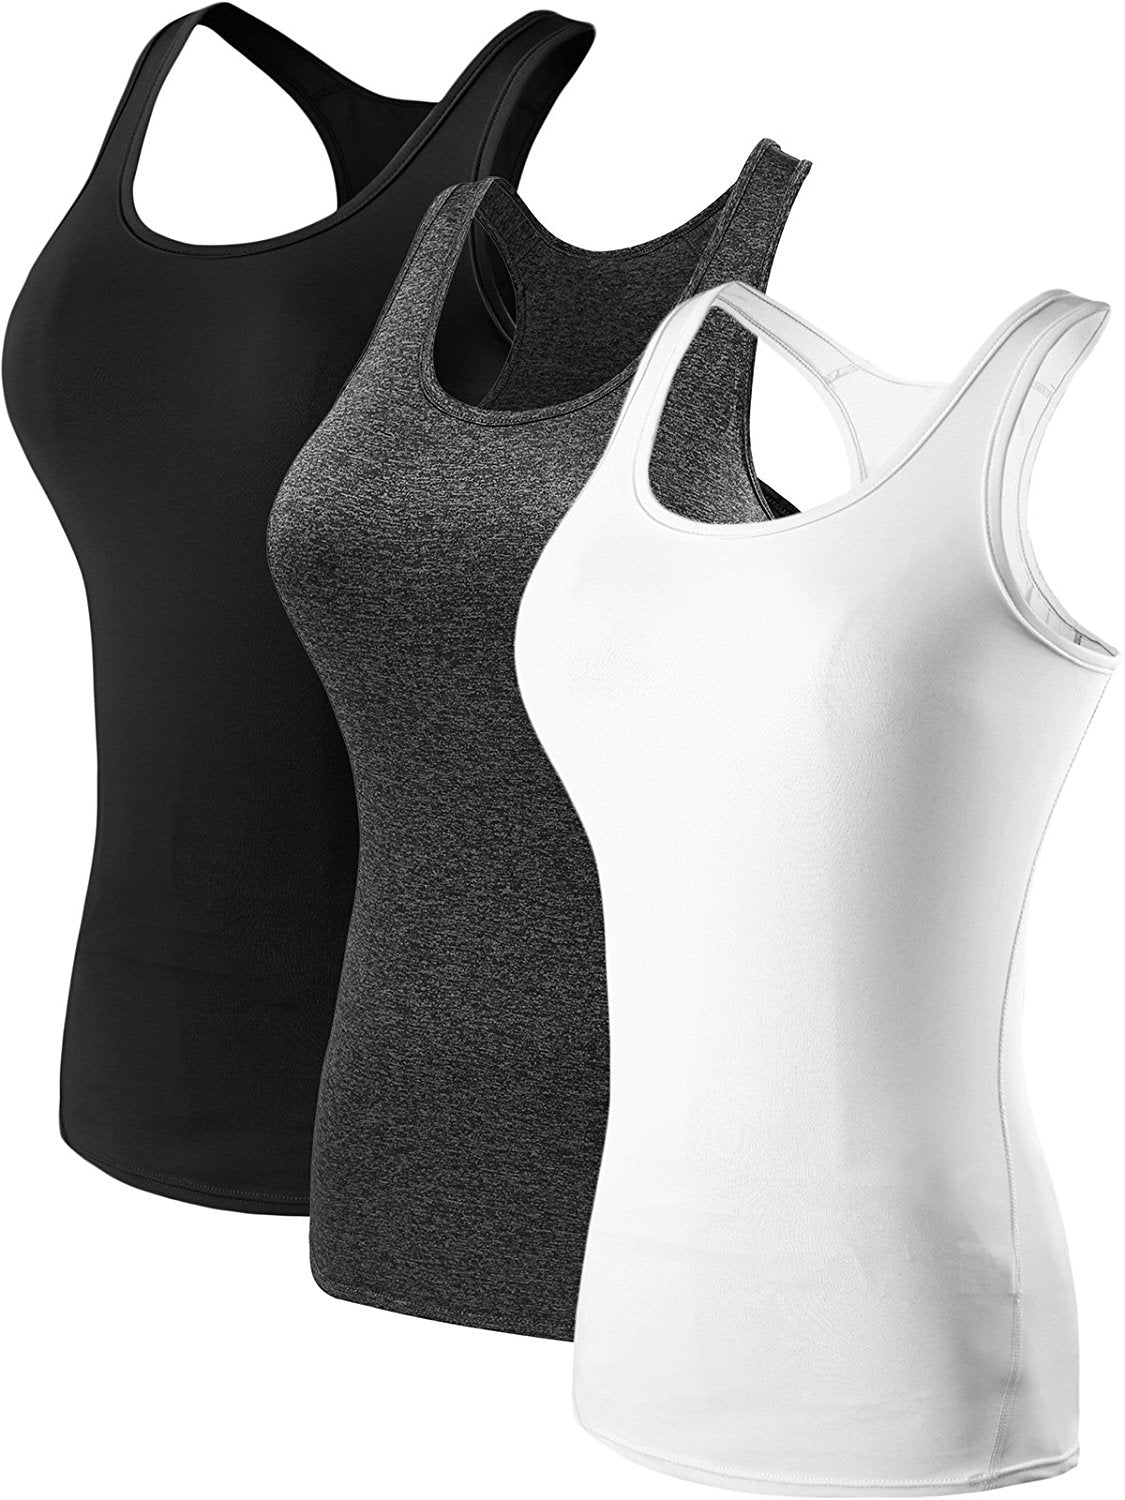 Cathalem Bra Tank Tops for Women Double Layer Workout Fitness